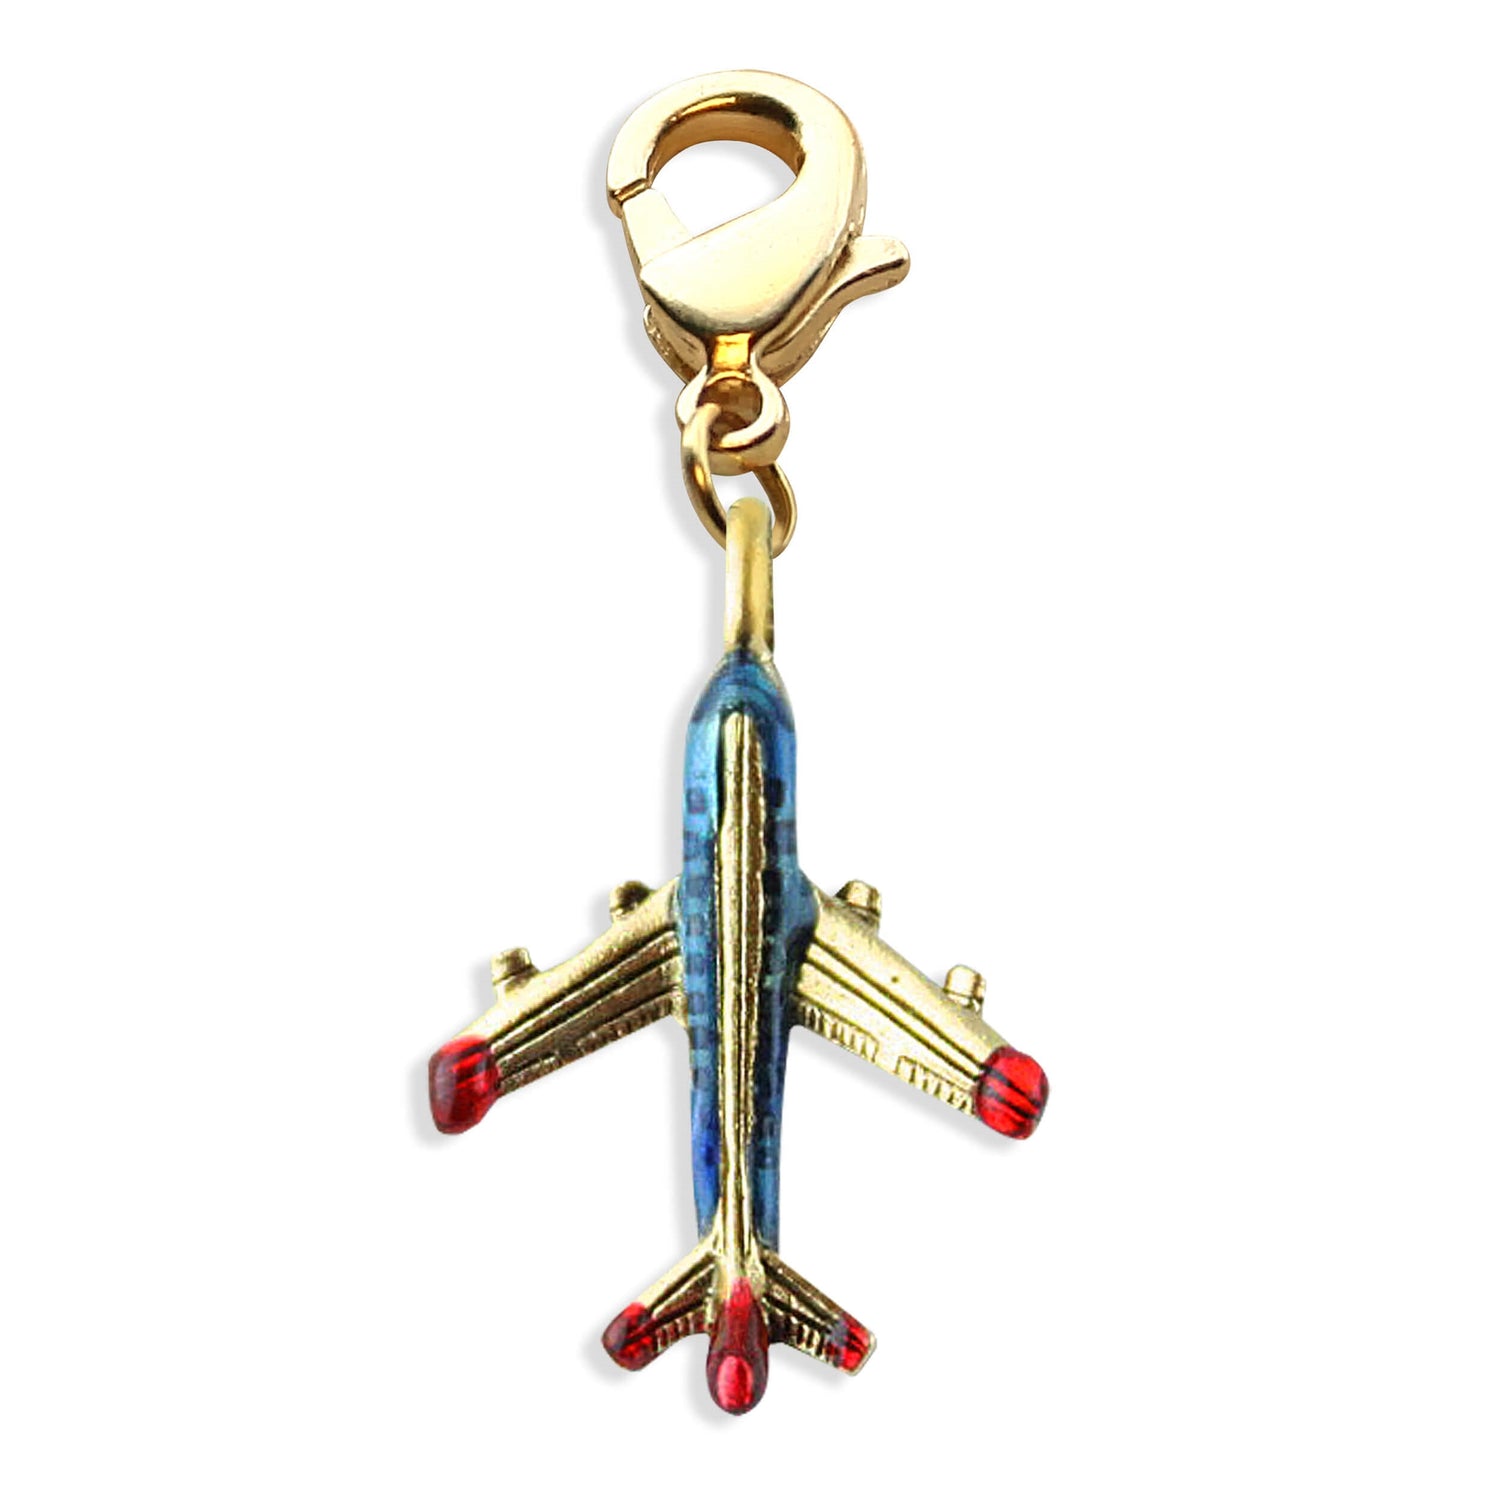 Whimsical Gifts | Airplane Charm Dangle in Gold Finish | Professions Themed | Flight Attendant | Traveler Charm Dangle